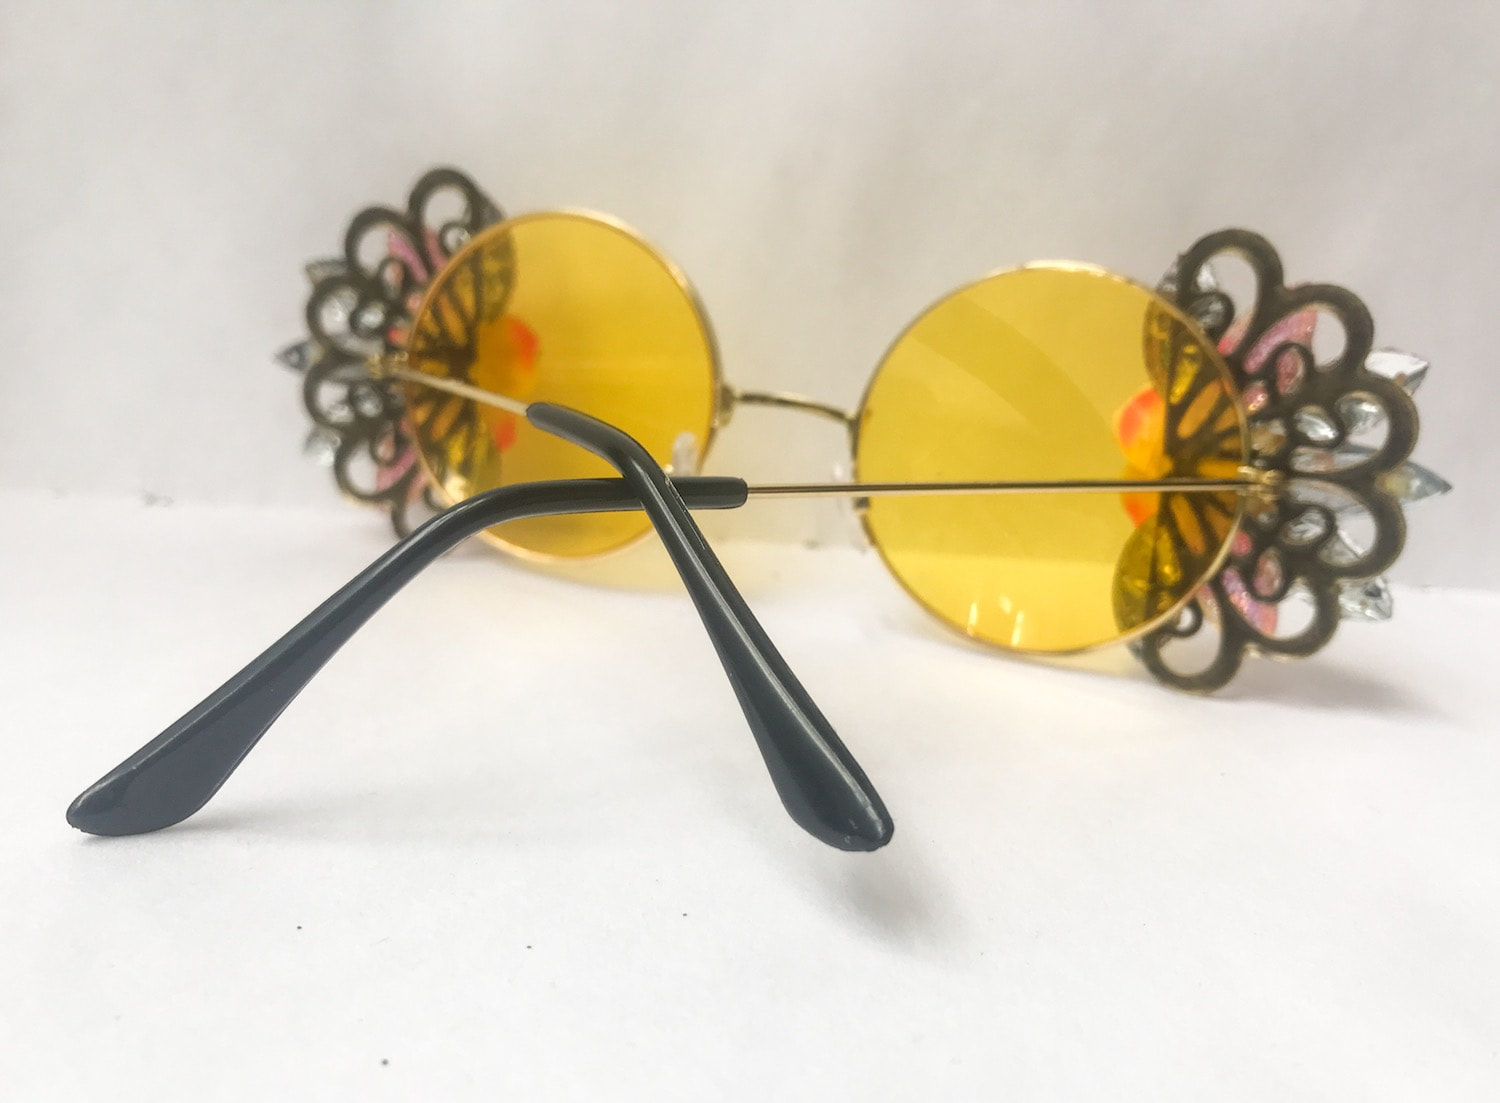 Yellow Floral Rhinestone Sunglasses Yellow Sunglasses Handcrafted With Flowers And Rhinestones